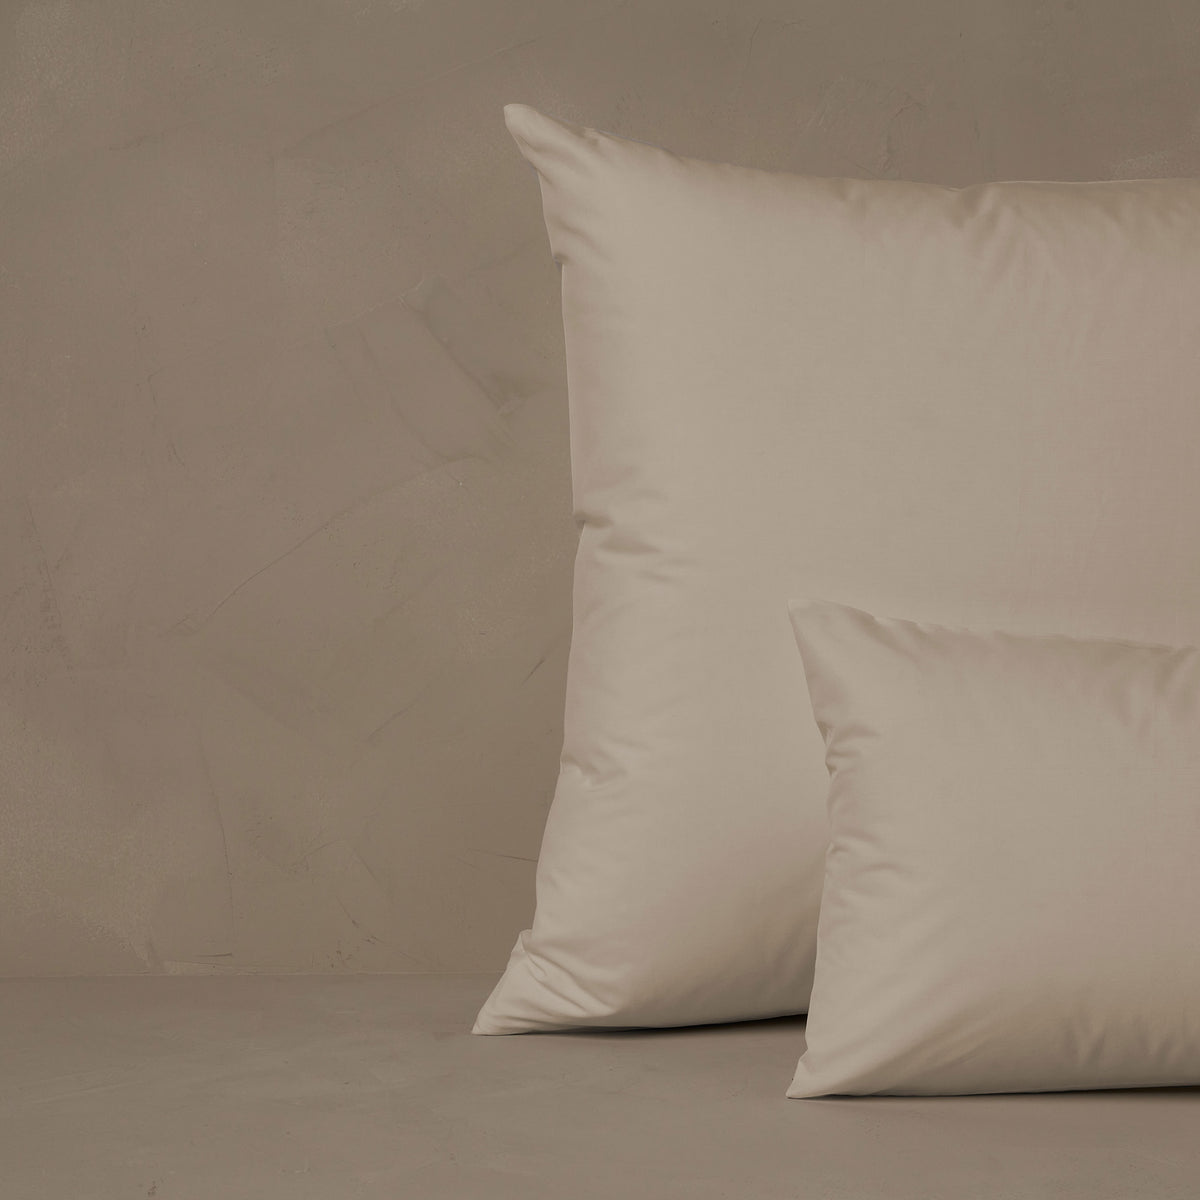 An image of a small boudoir or travel size pillow stacked in front of a large euro size pillow. The pillow cases are made in Italy of crisp and cool LETTO Giza Reserve Cotton Percale in color ivory. data-image-id=